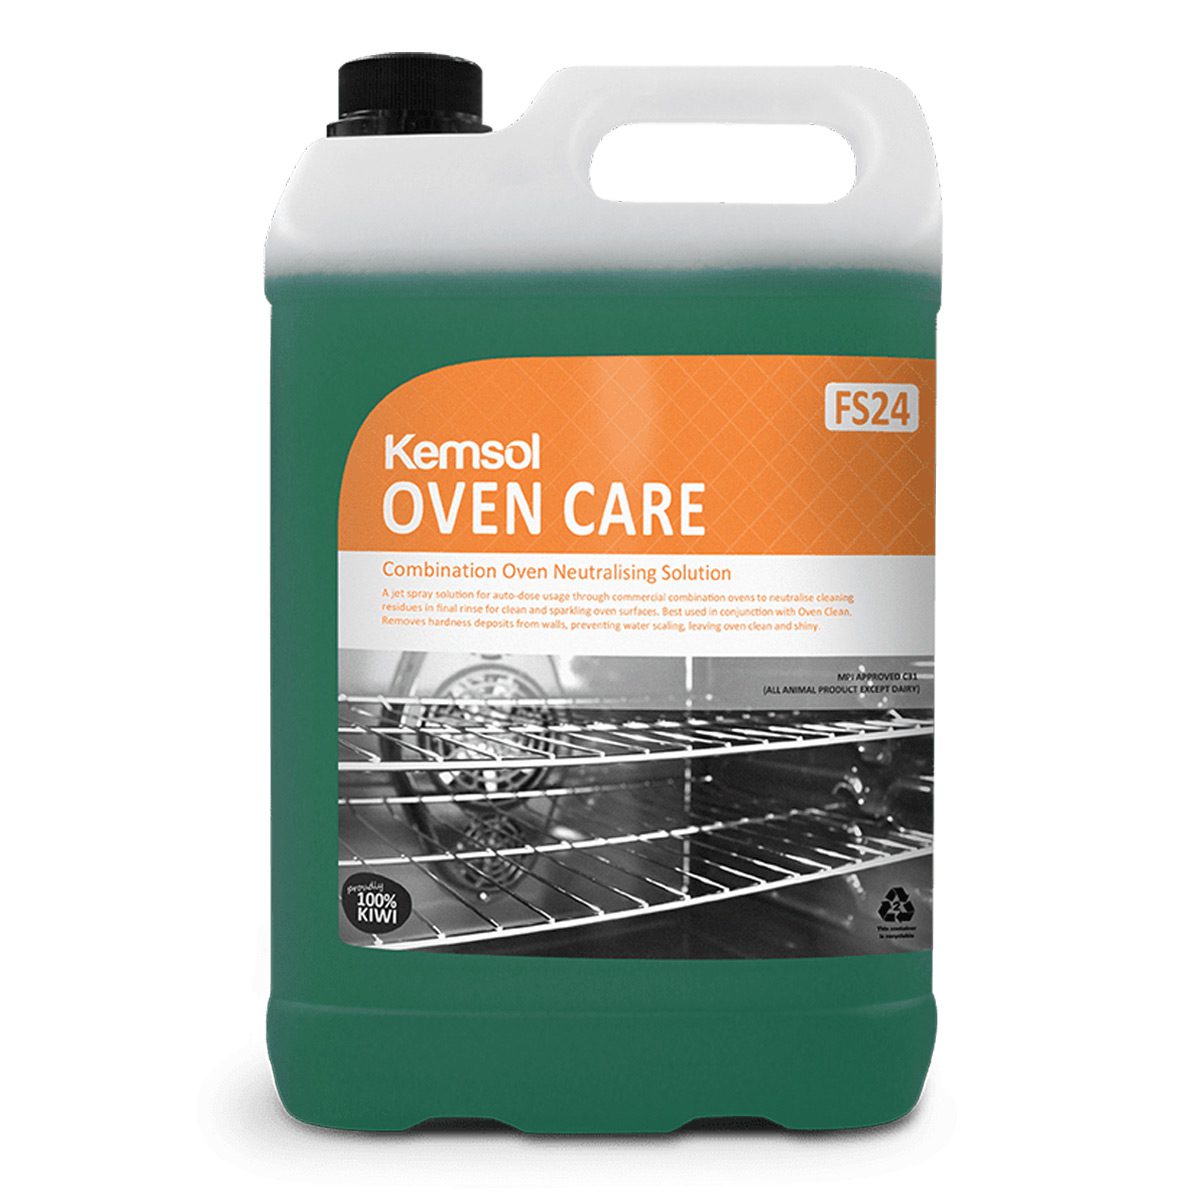 cleaning-products-kitchen-multipurpose-oven-care-neutralising-5L-litre-jet-spray-solution-auto-dose-usage-commercial-combination-ovens-neutralise-cleaning-residues-vjs-distributors-KEMOVCARE05